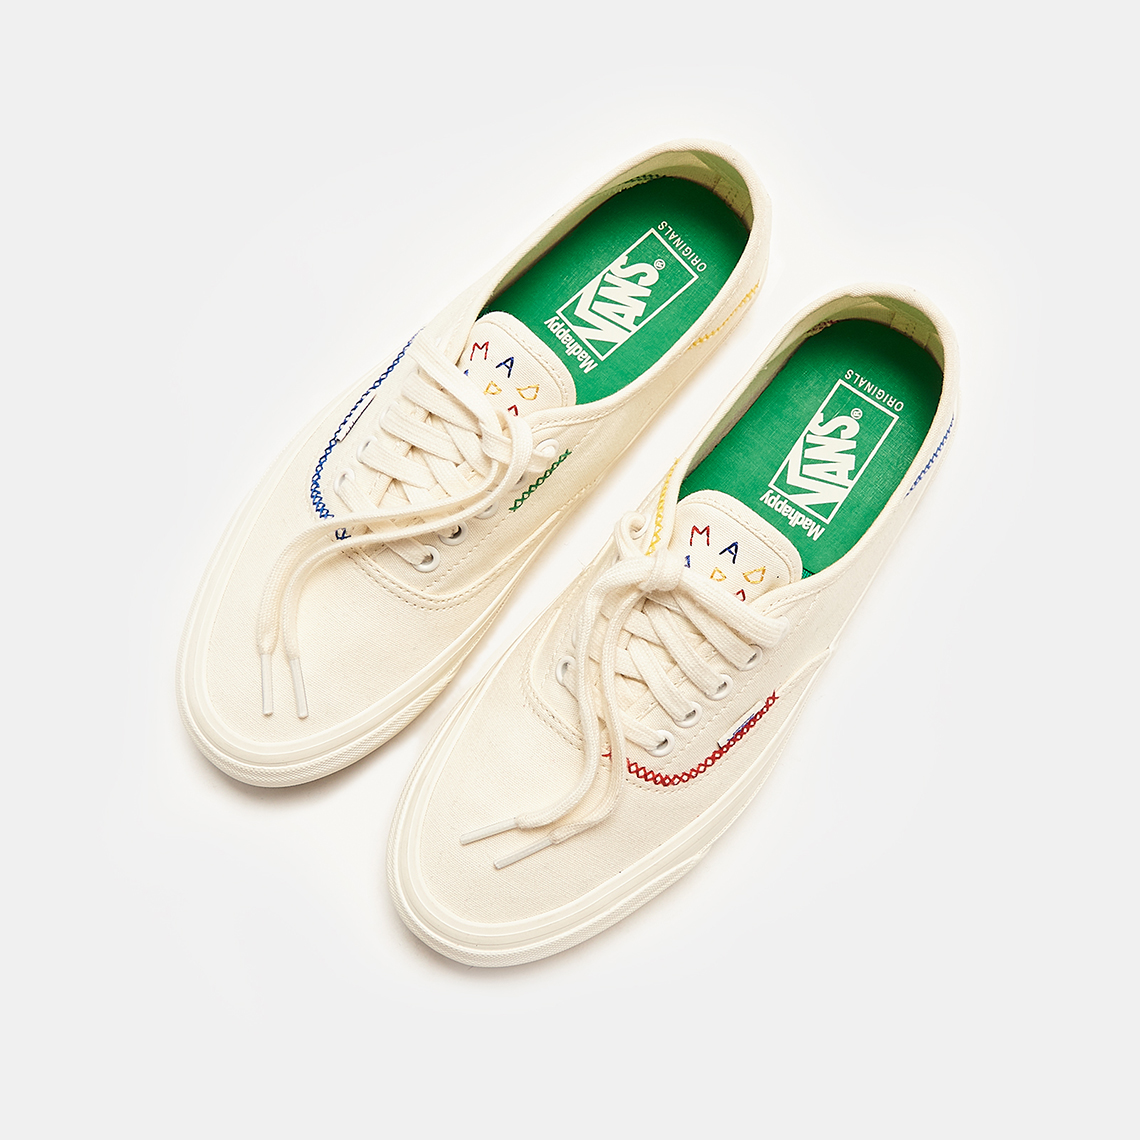 the Vans Anaheim Factory Style 73 DX collection is launching soon